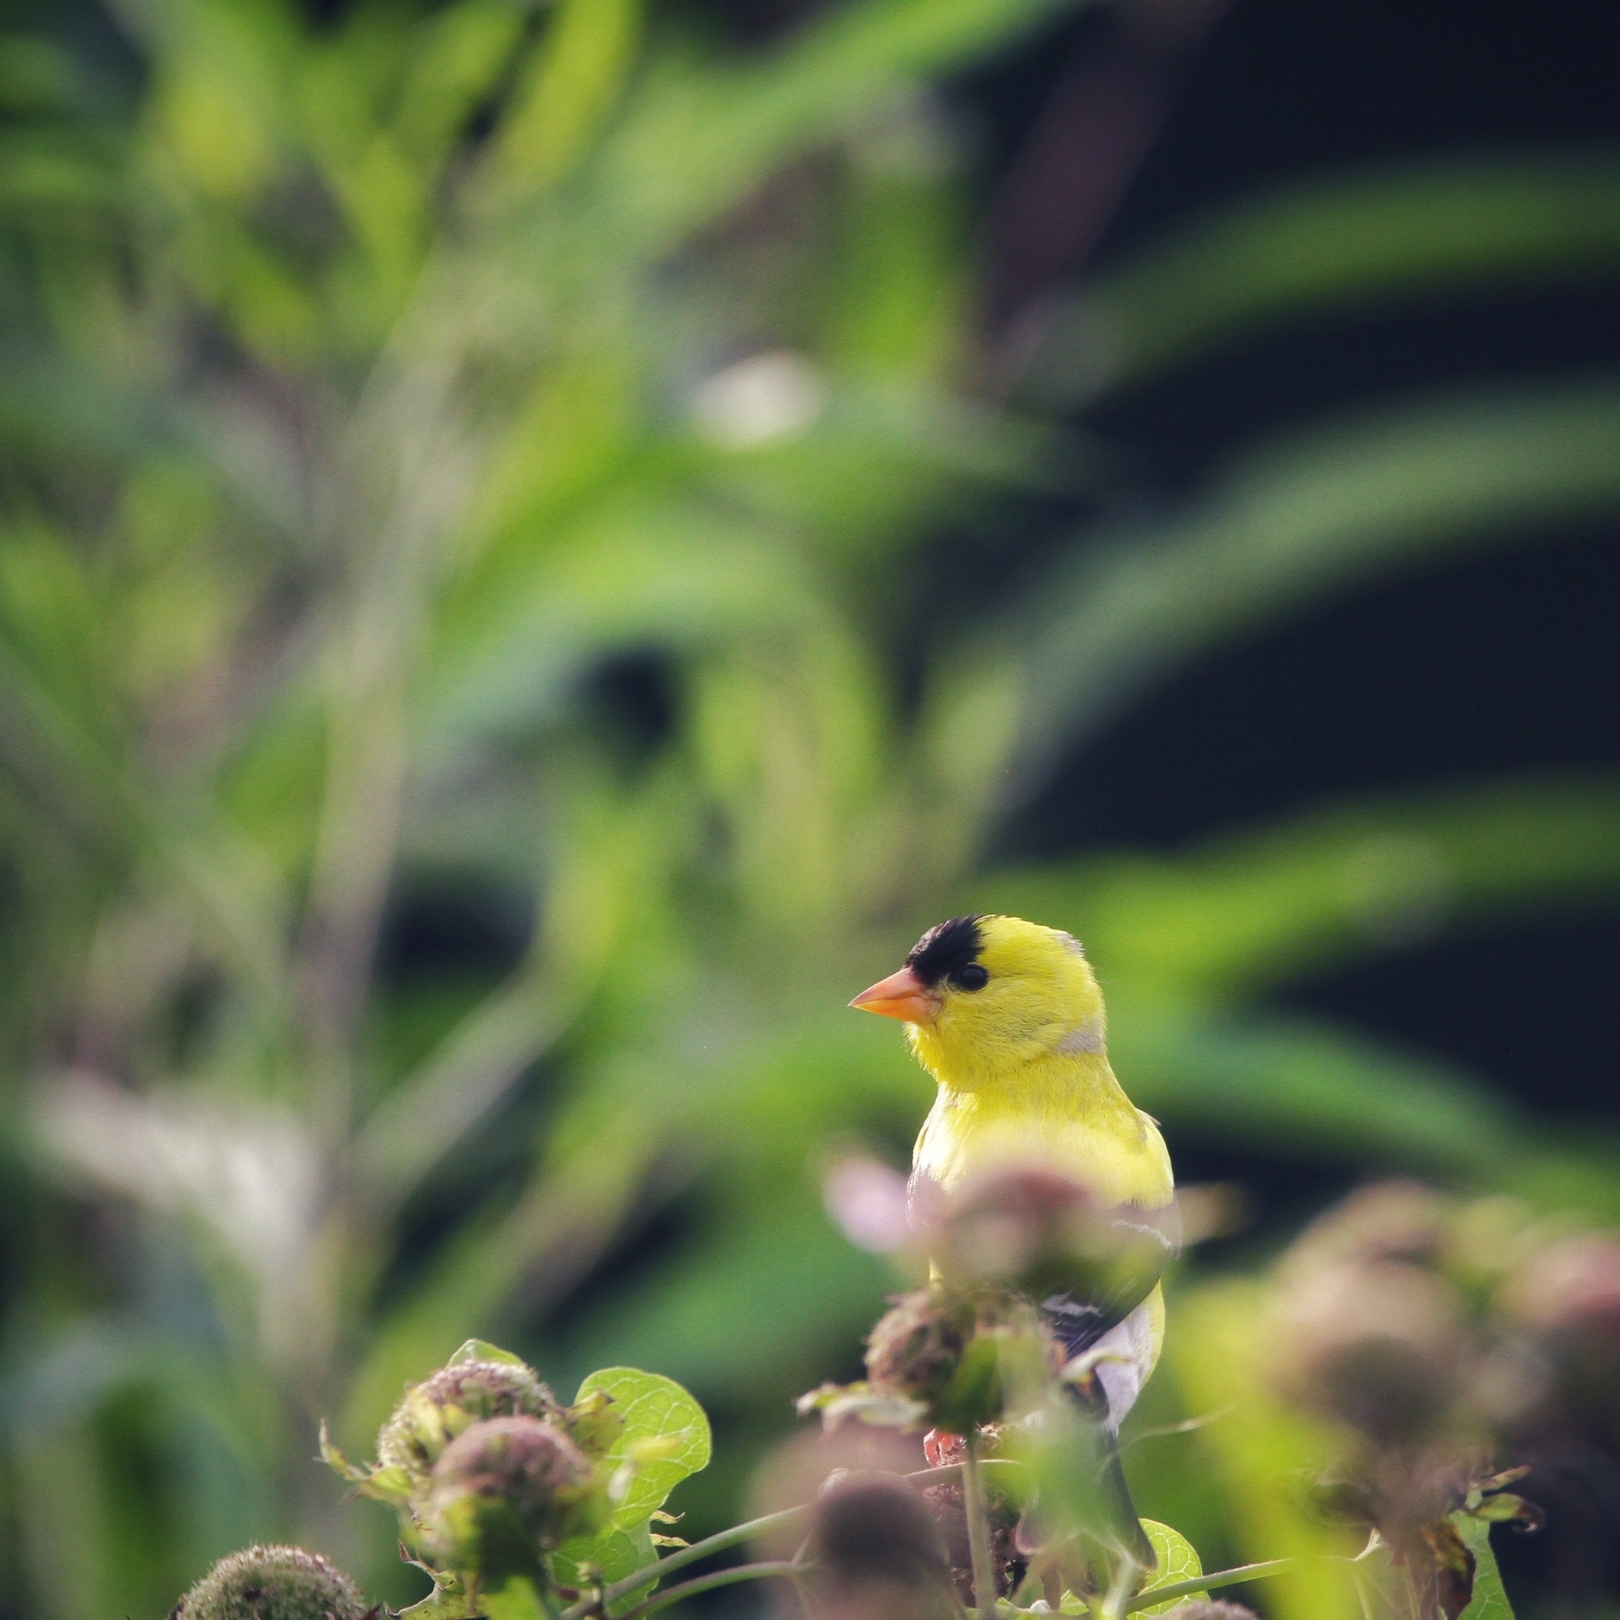 A male American Goldfinch pauses on a wild bergamot plant as he's eating seeds